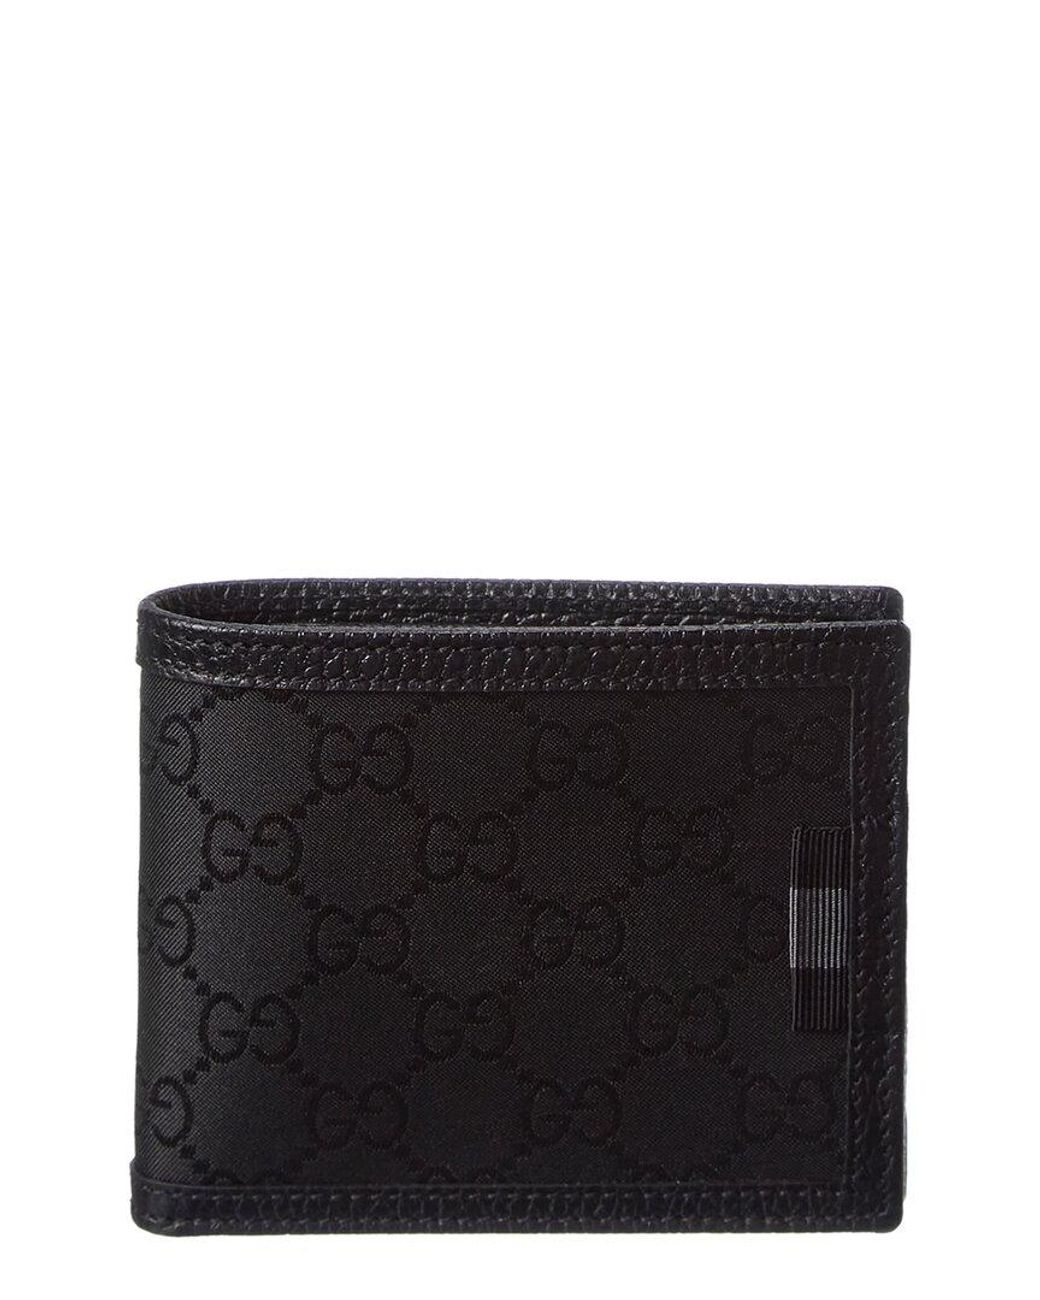 Real Genuine Gucci Men's Brown Micro GG Embossed Leather Bi-fold Wallet